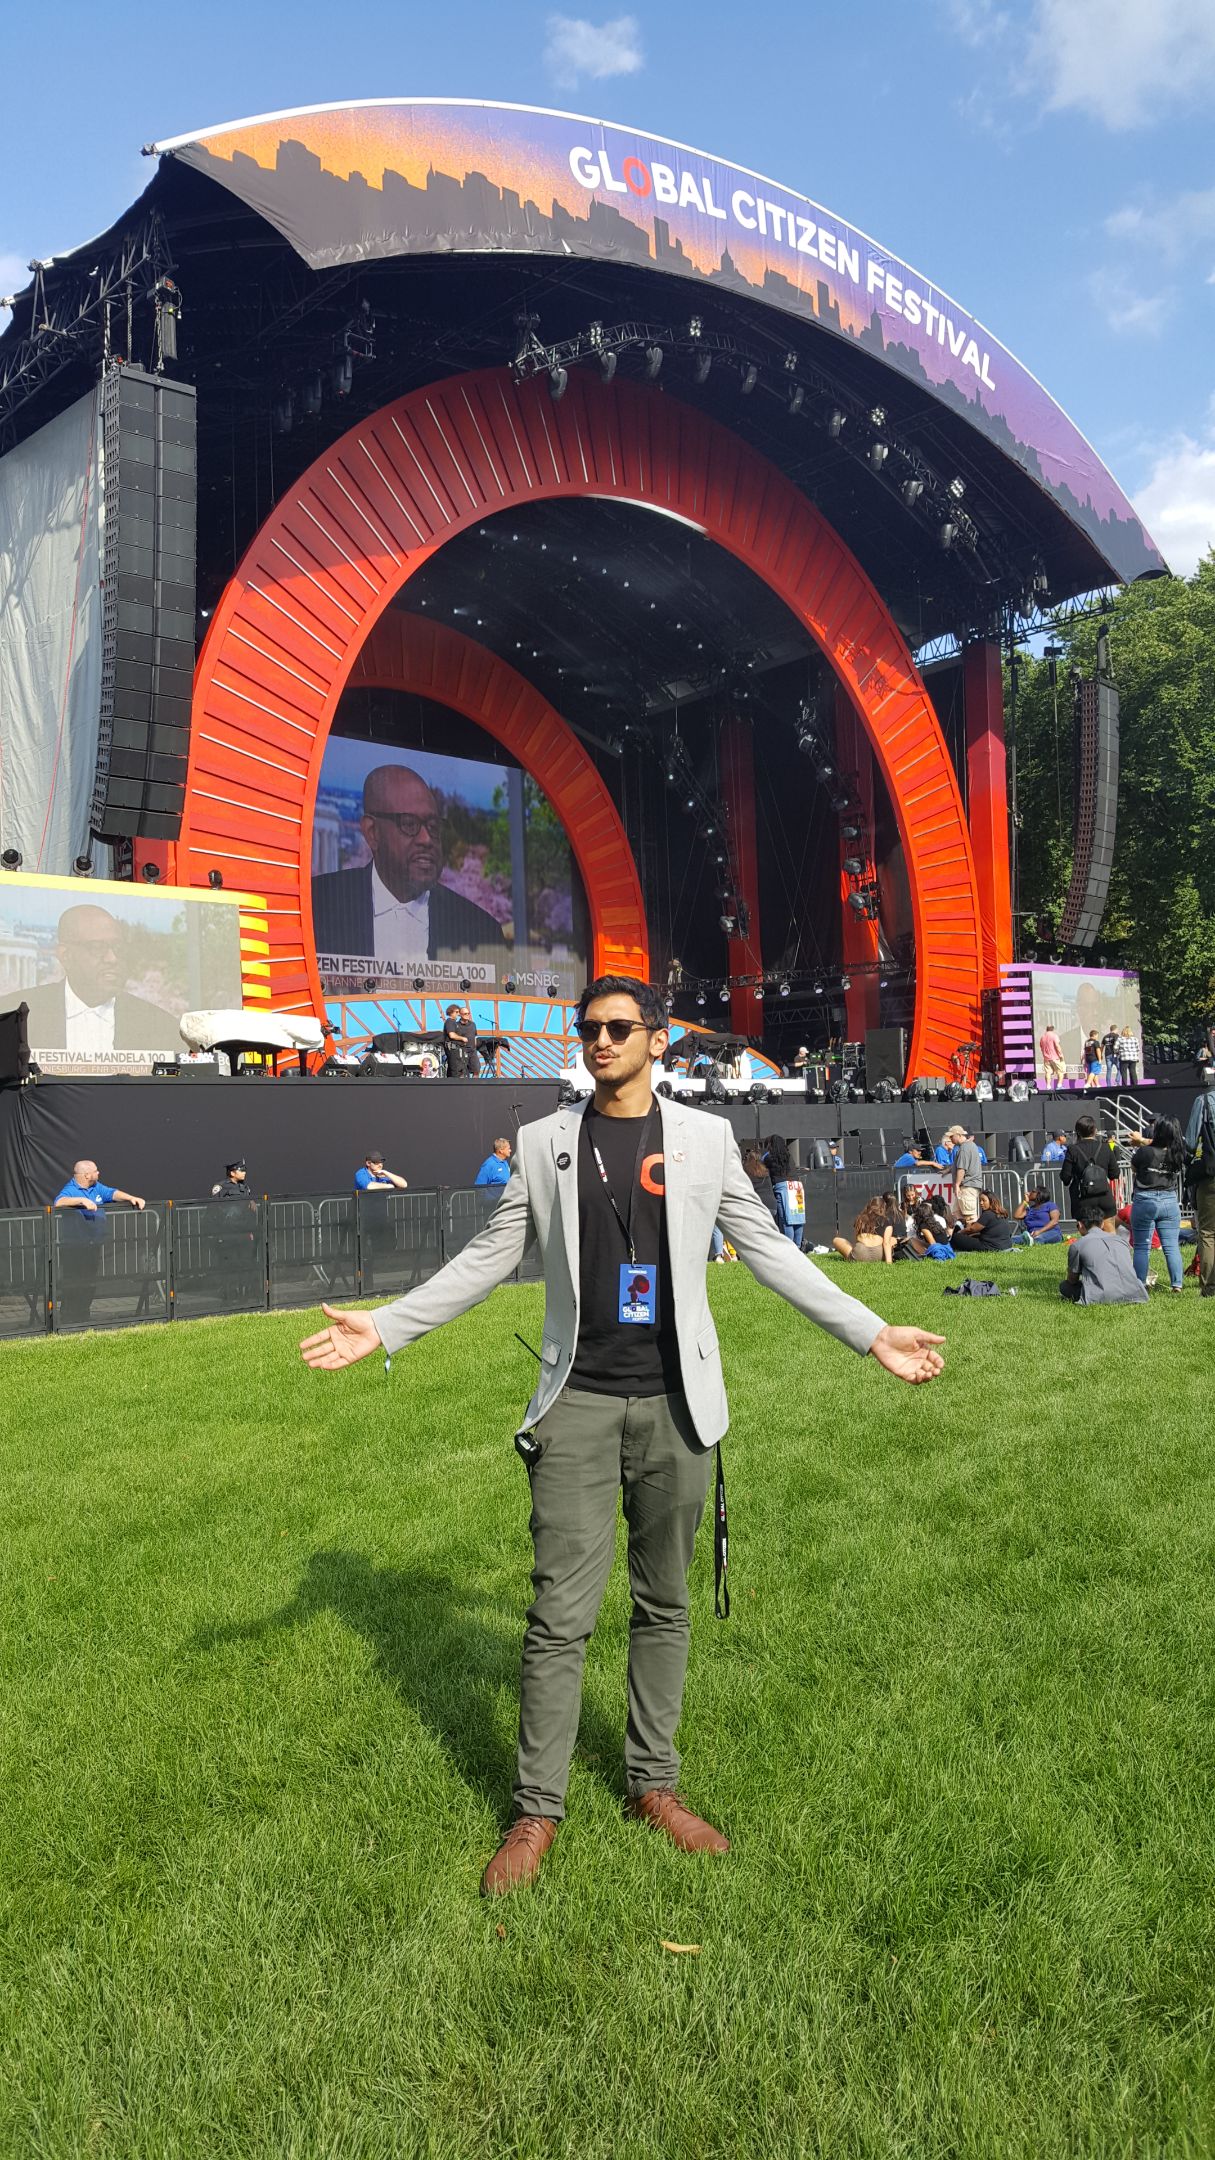 Man standing in front of a stage at the Global Citizen Festival